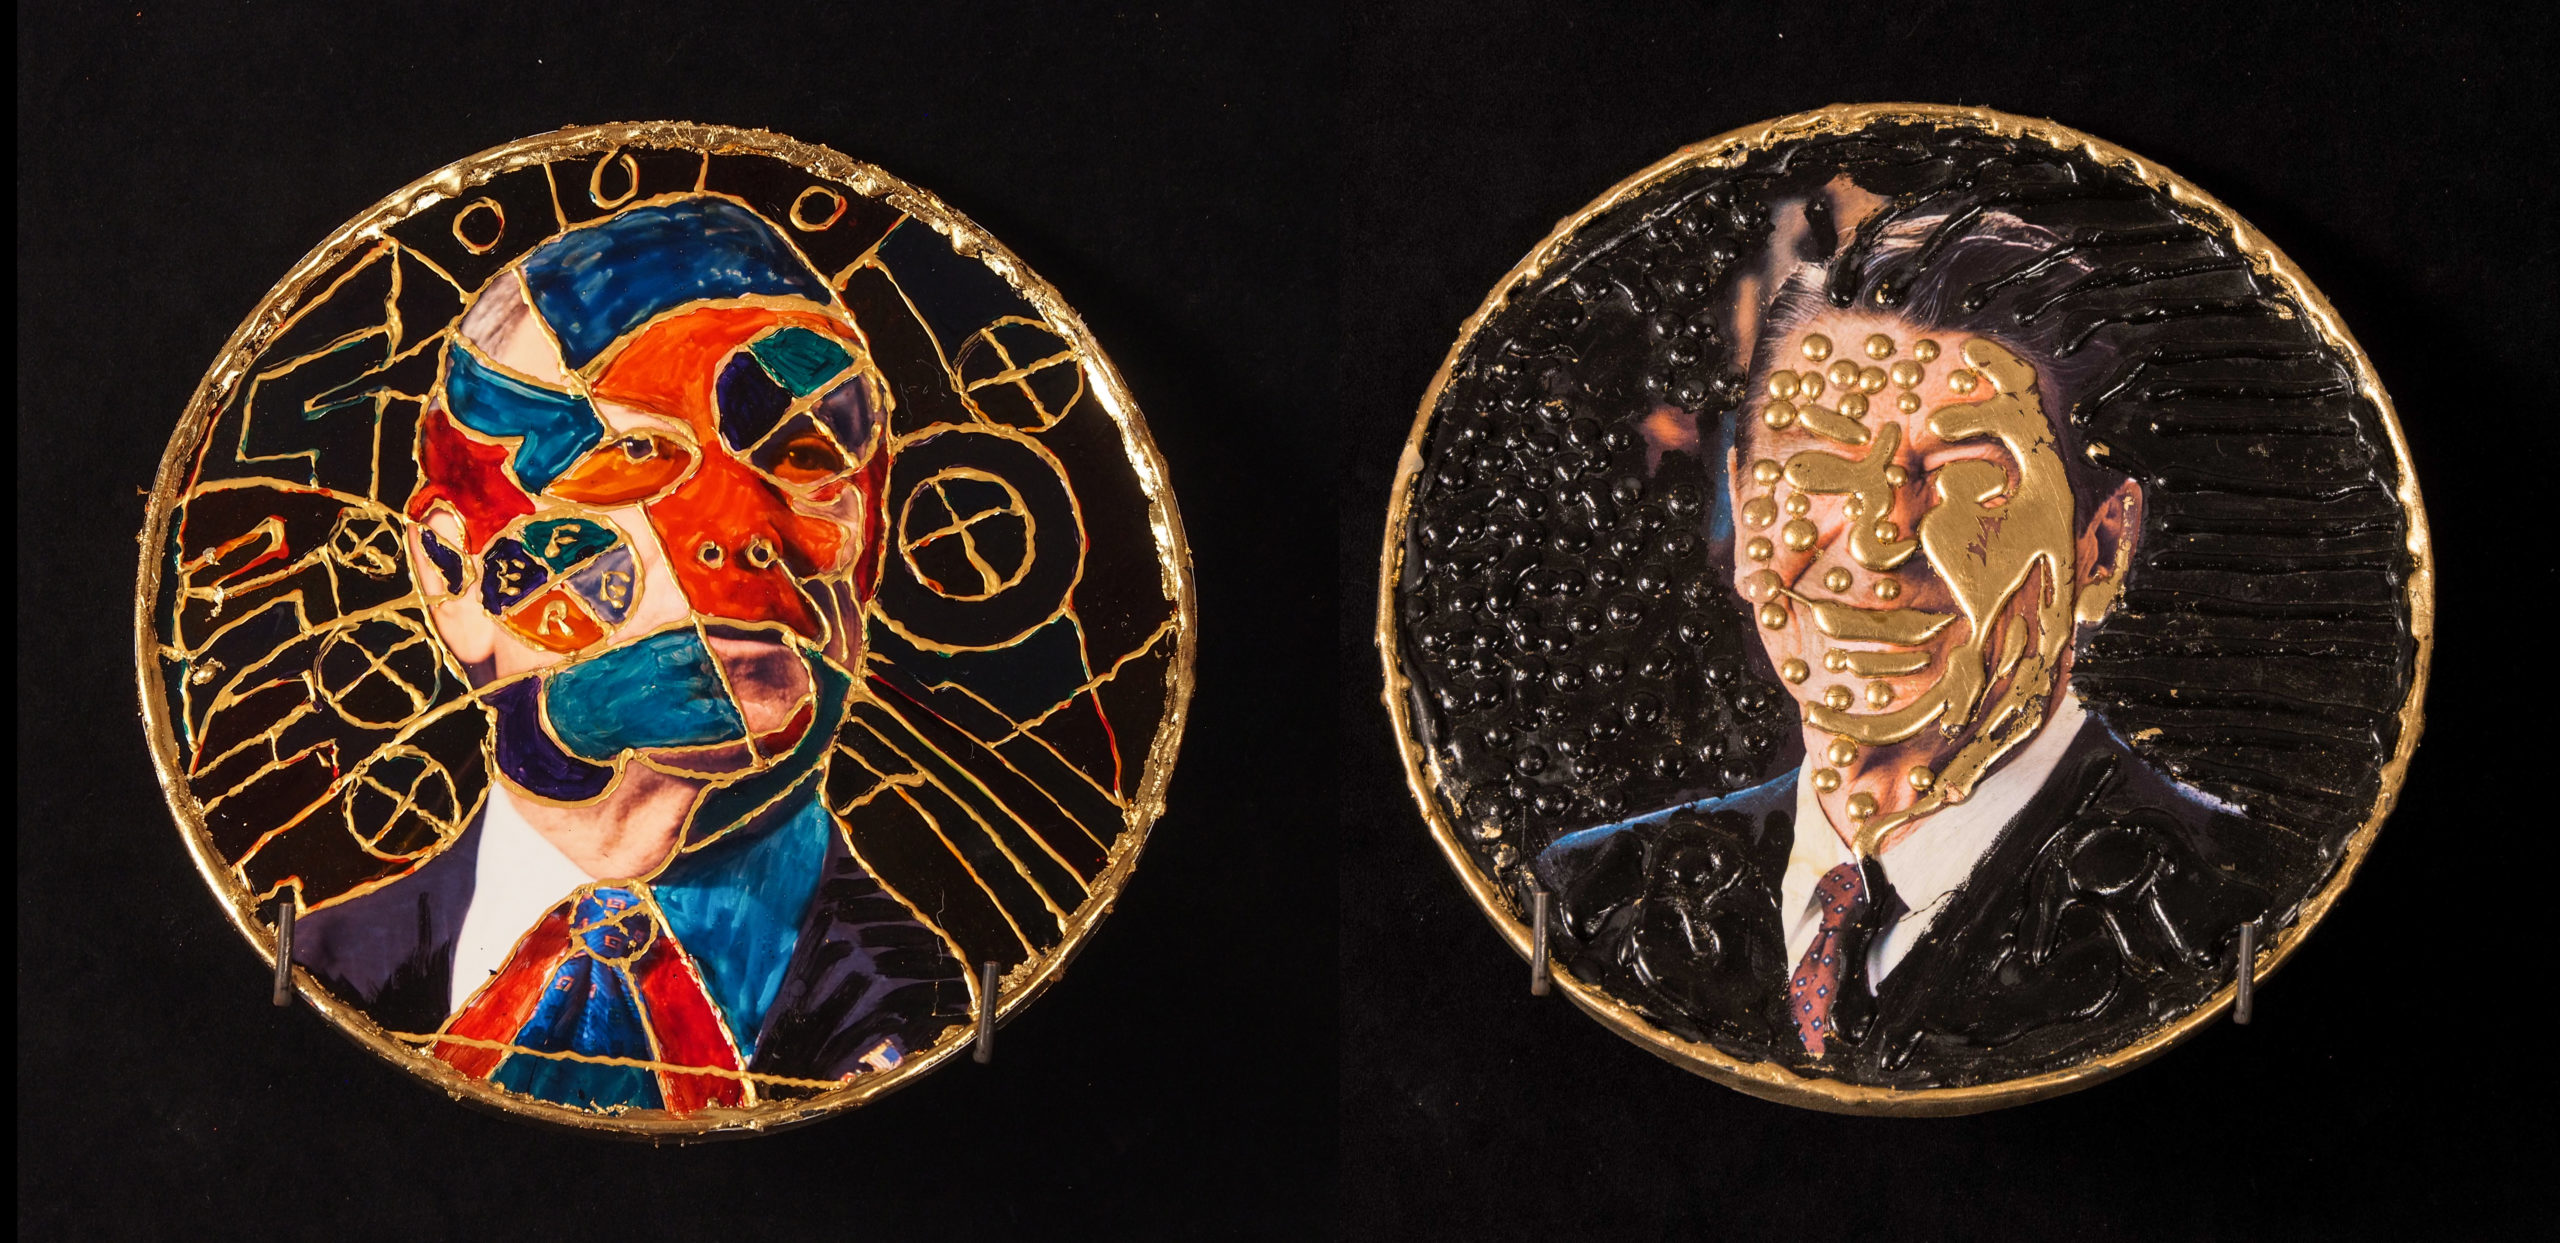 Black background, two gold circles. The first circle contains a blue-and-red collage image of Michael Bloomberg, and the other one contains an image of Ronald Reagan with gold paint covering his face.